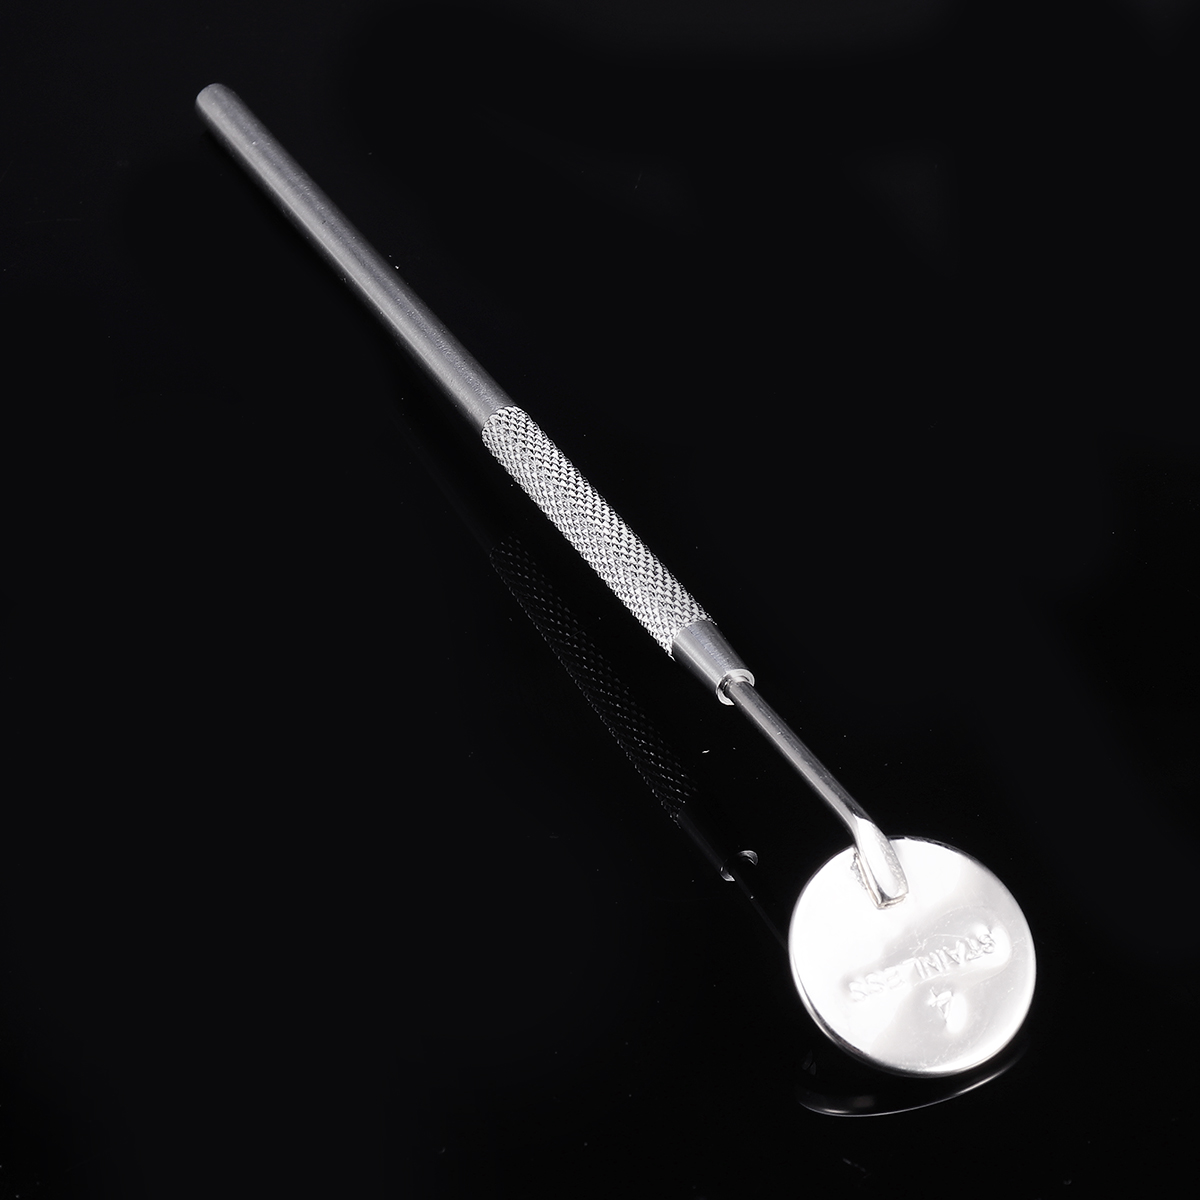 10Pcs-Dental-Mouth-Mirror-With-Handle-Dental-Instrument-Stainless-Steel-16cm-Dental-Tools-1309485